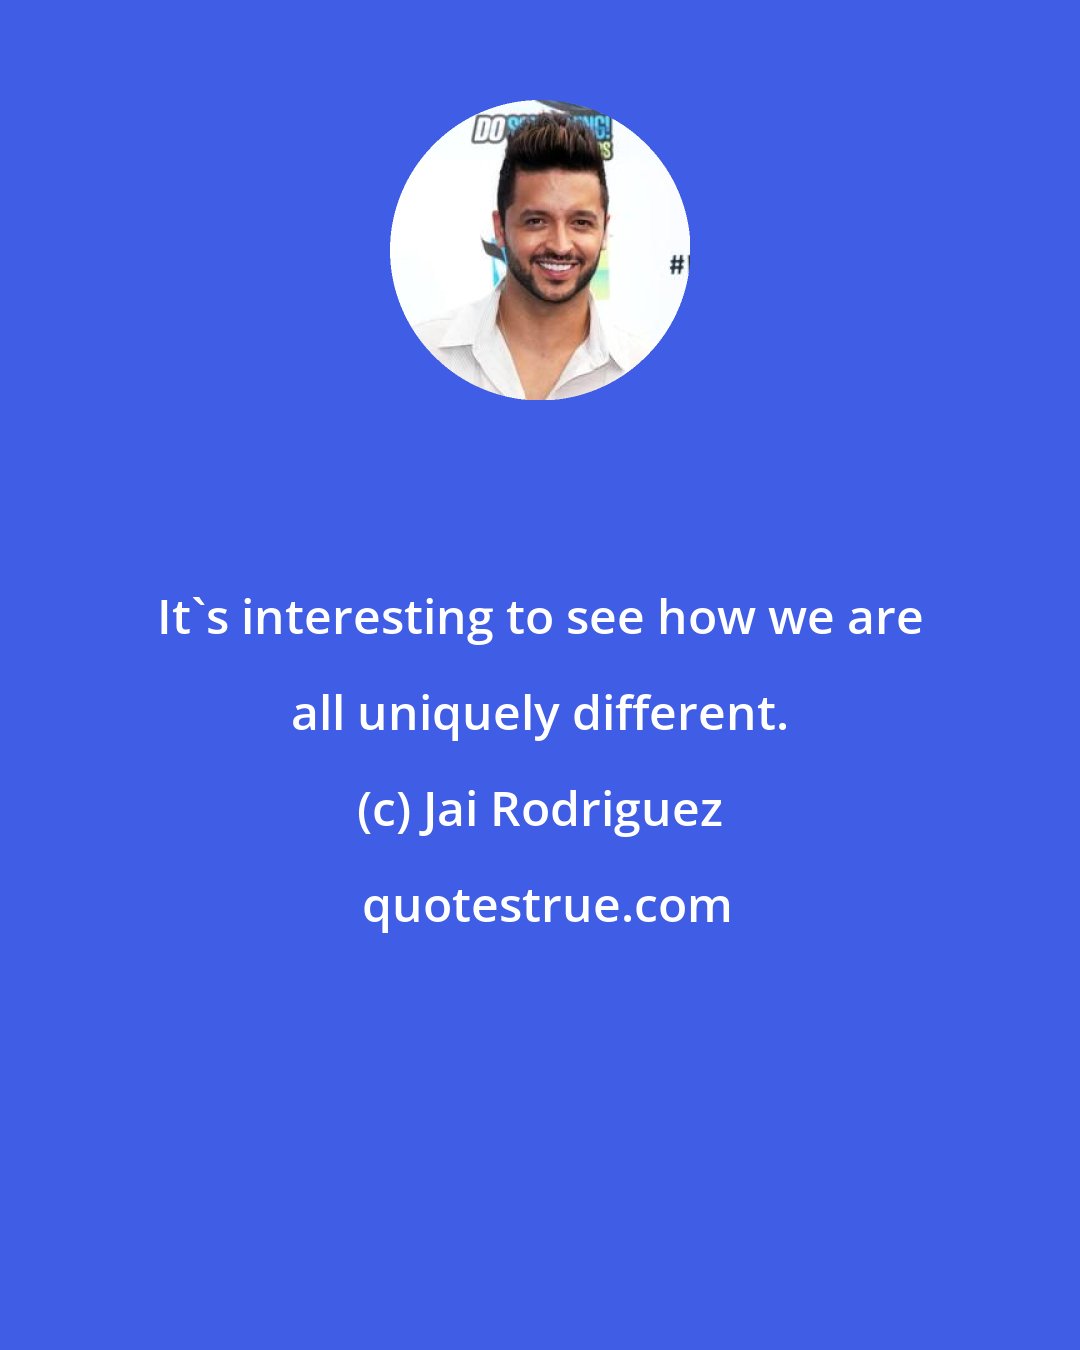 Jai Rodriguez: It's interesting to see how we are all uniquely different.